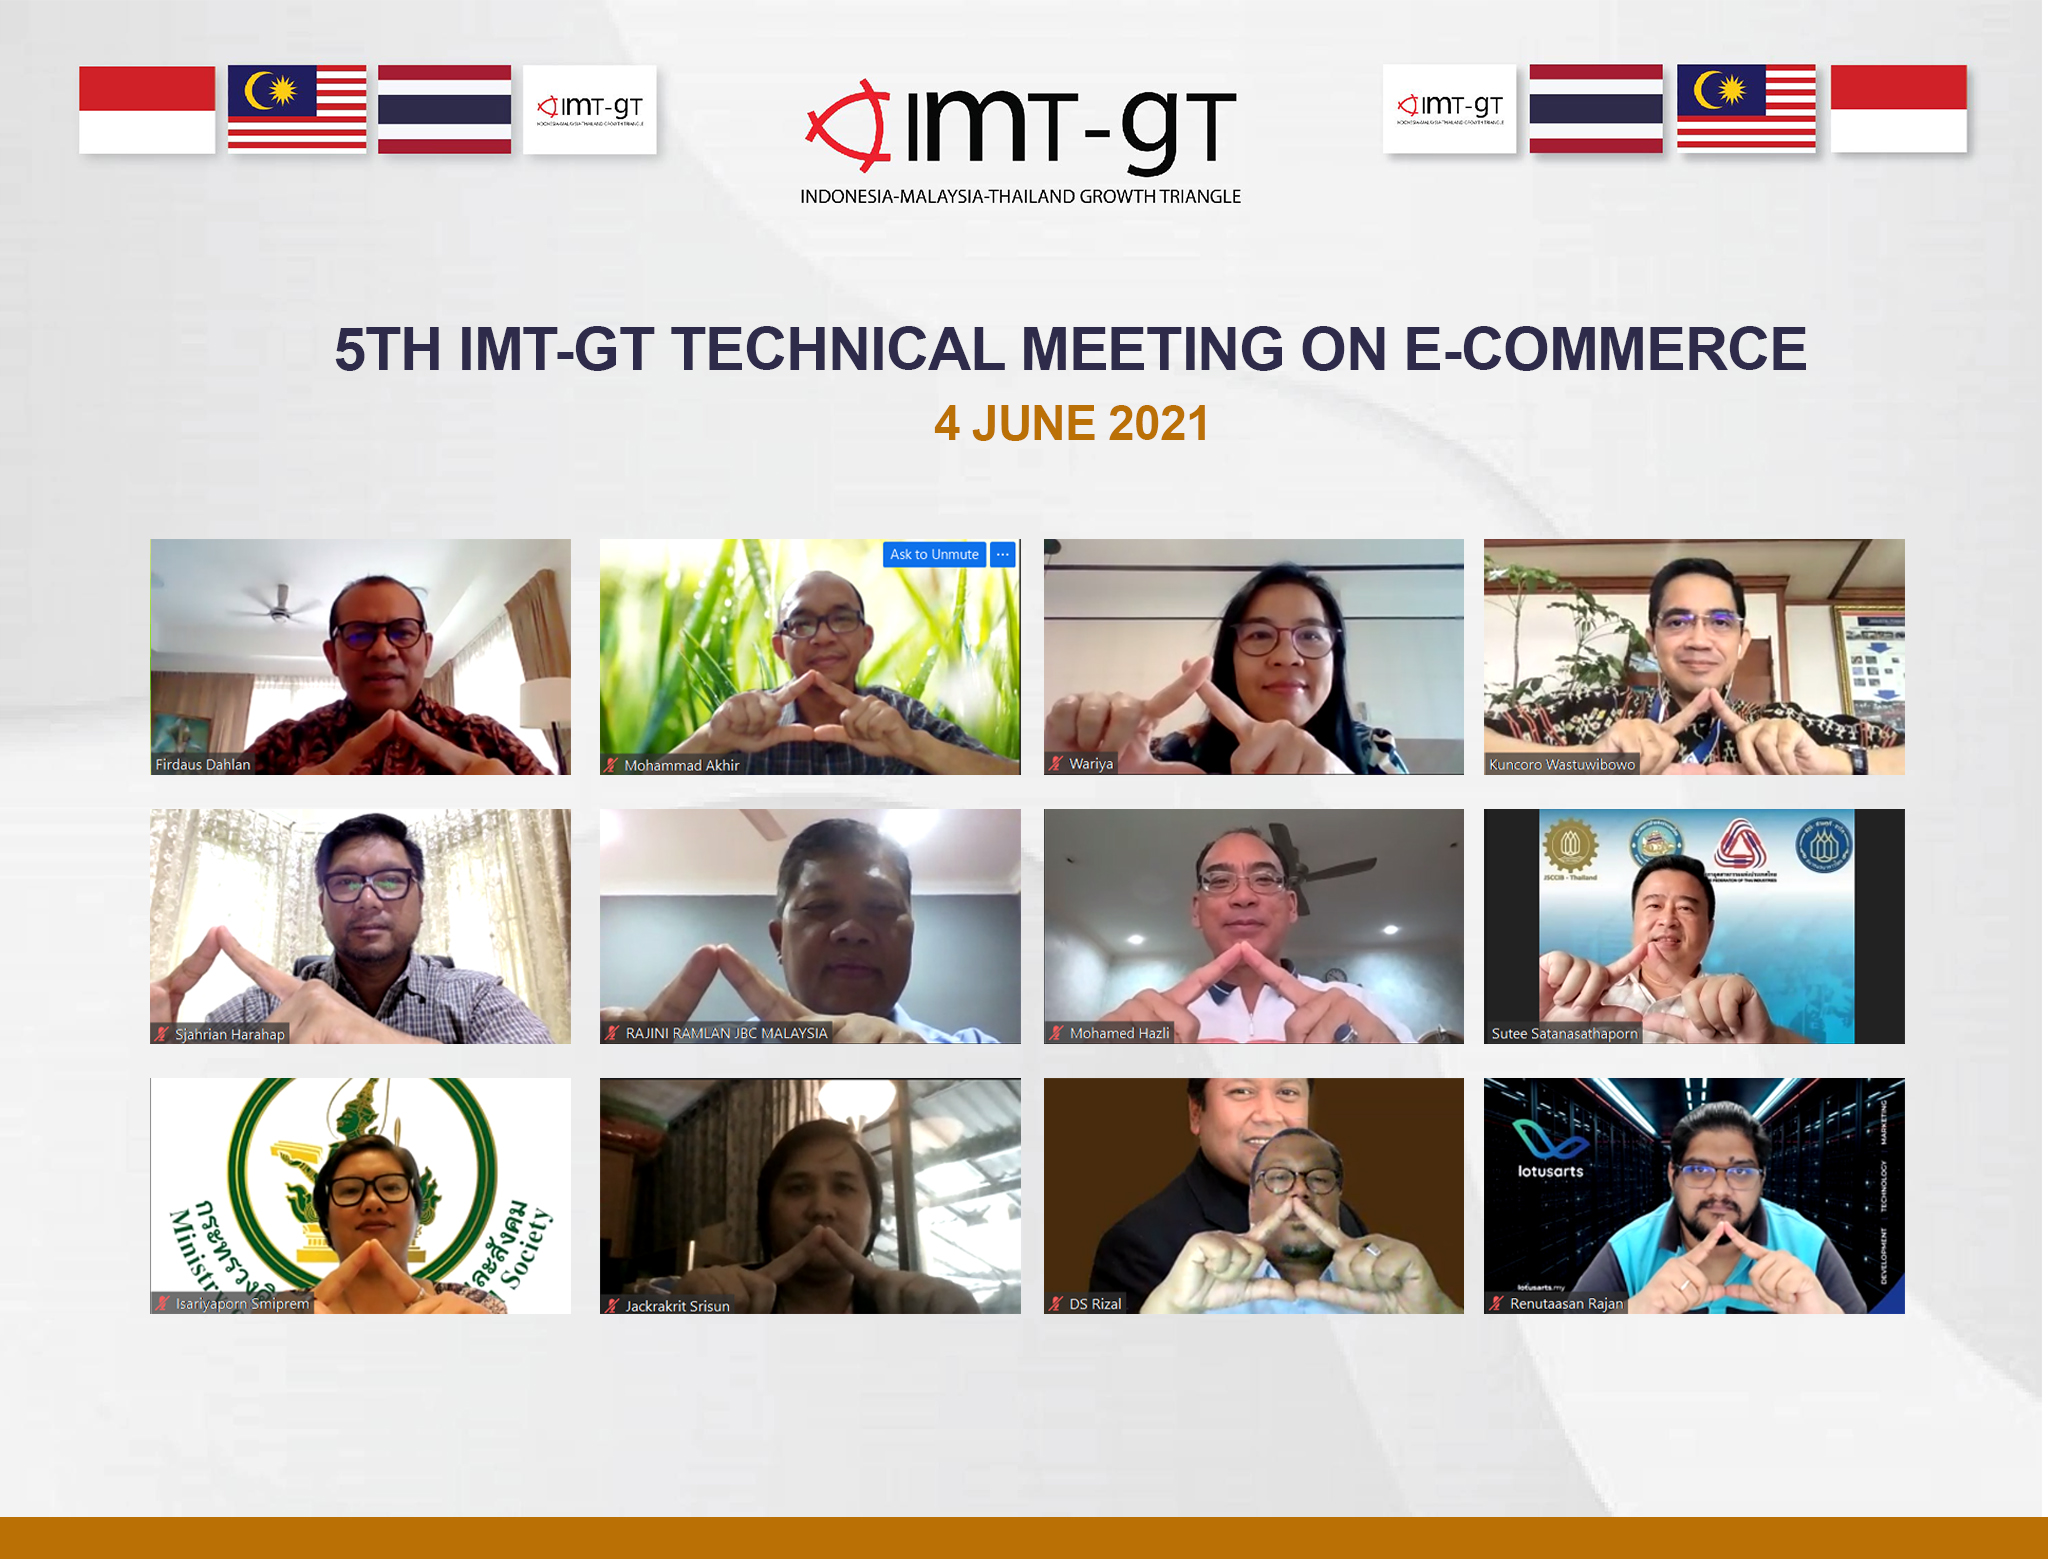 5TH IMT-GT TECHNICAL MEETING ON E-COMMERCE